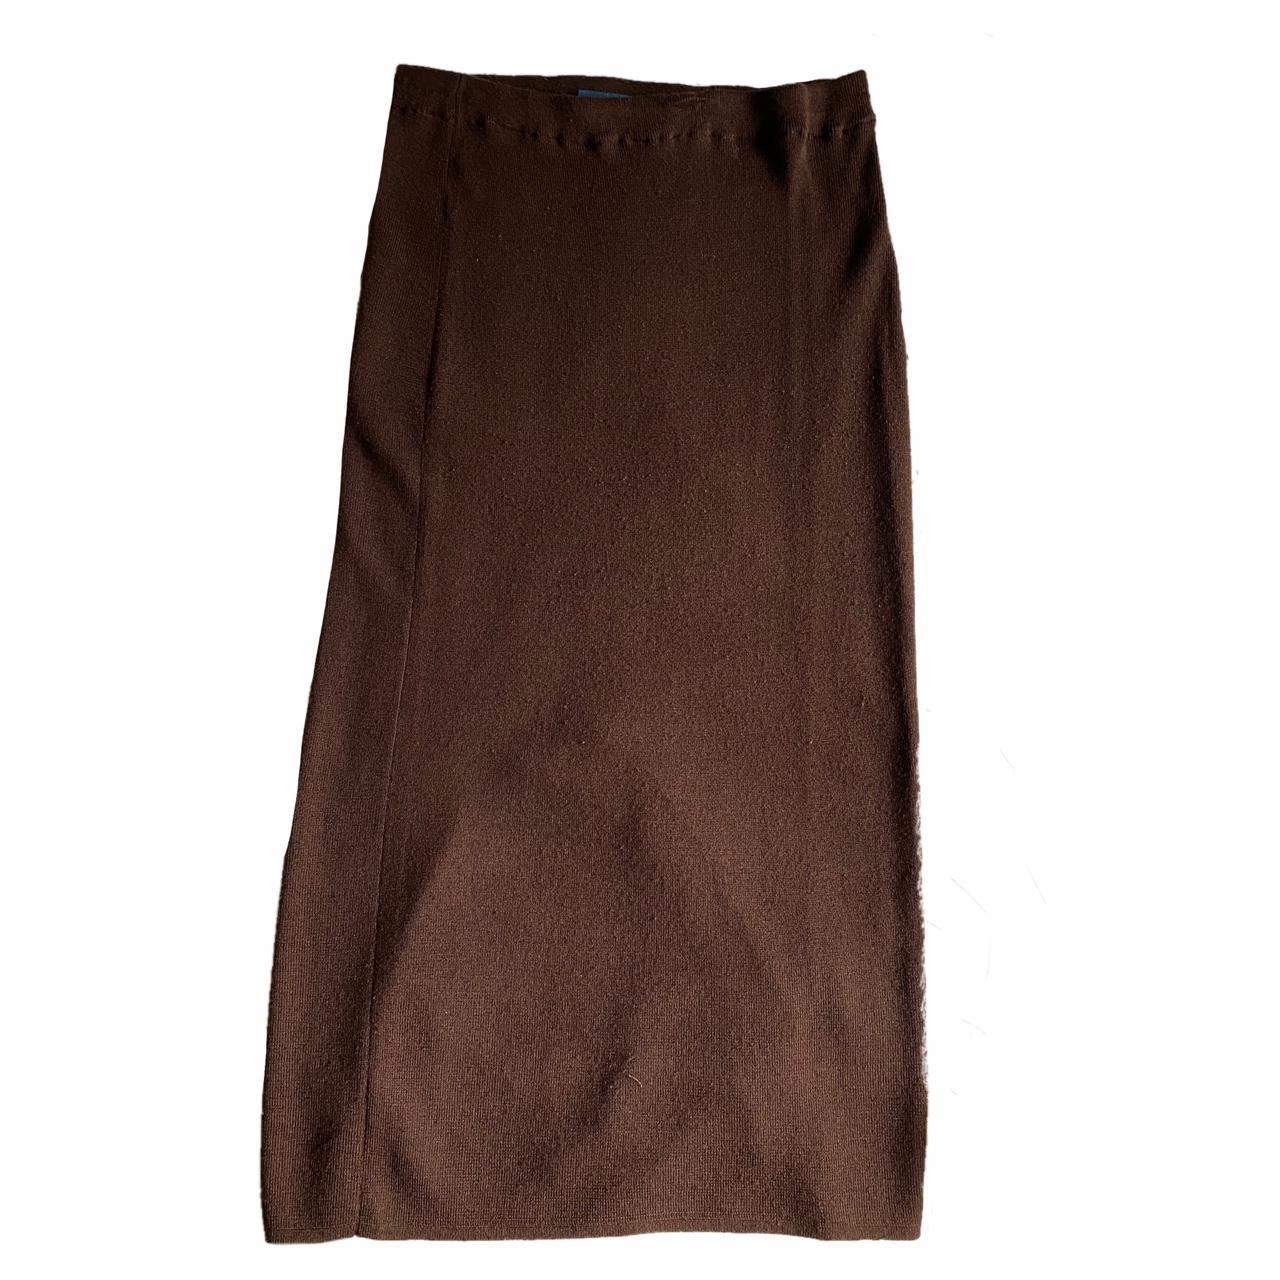 Product Image 2 - absolutely beautiful vintage 90s brown